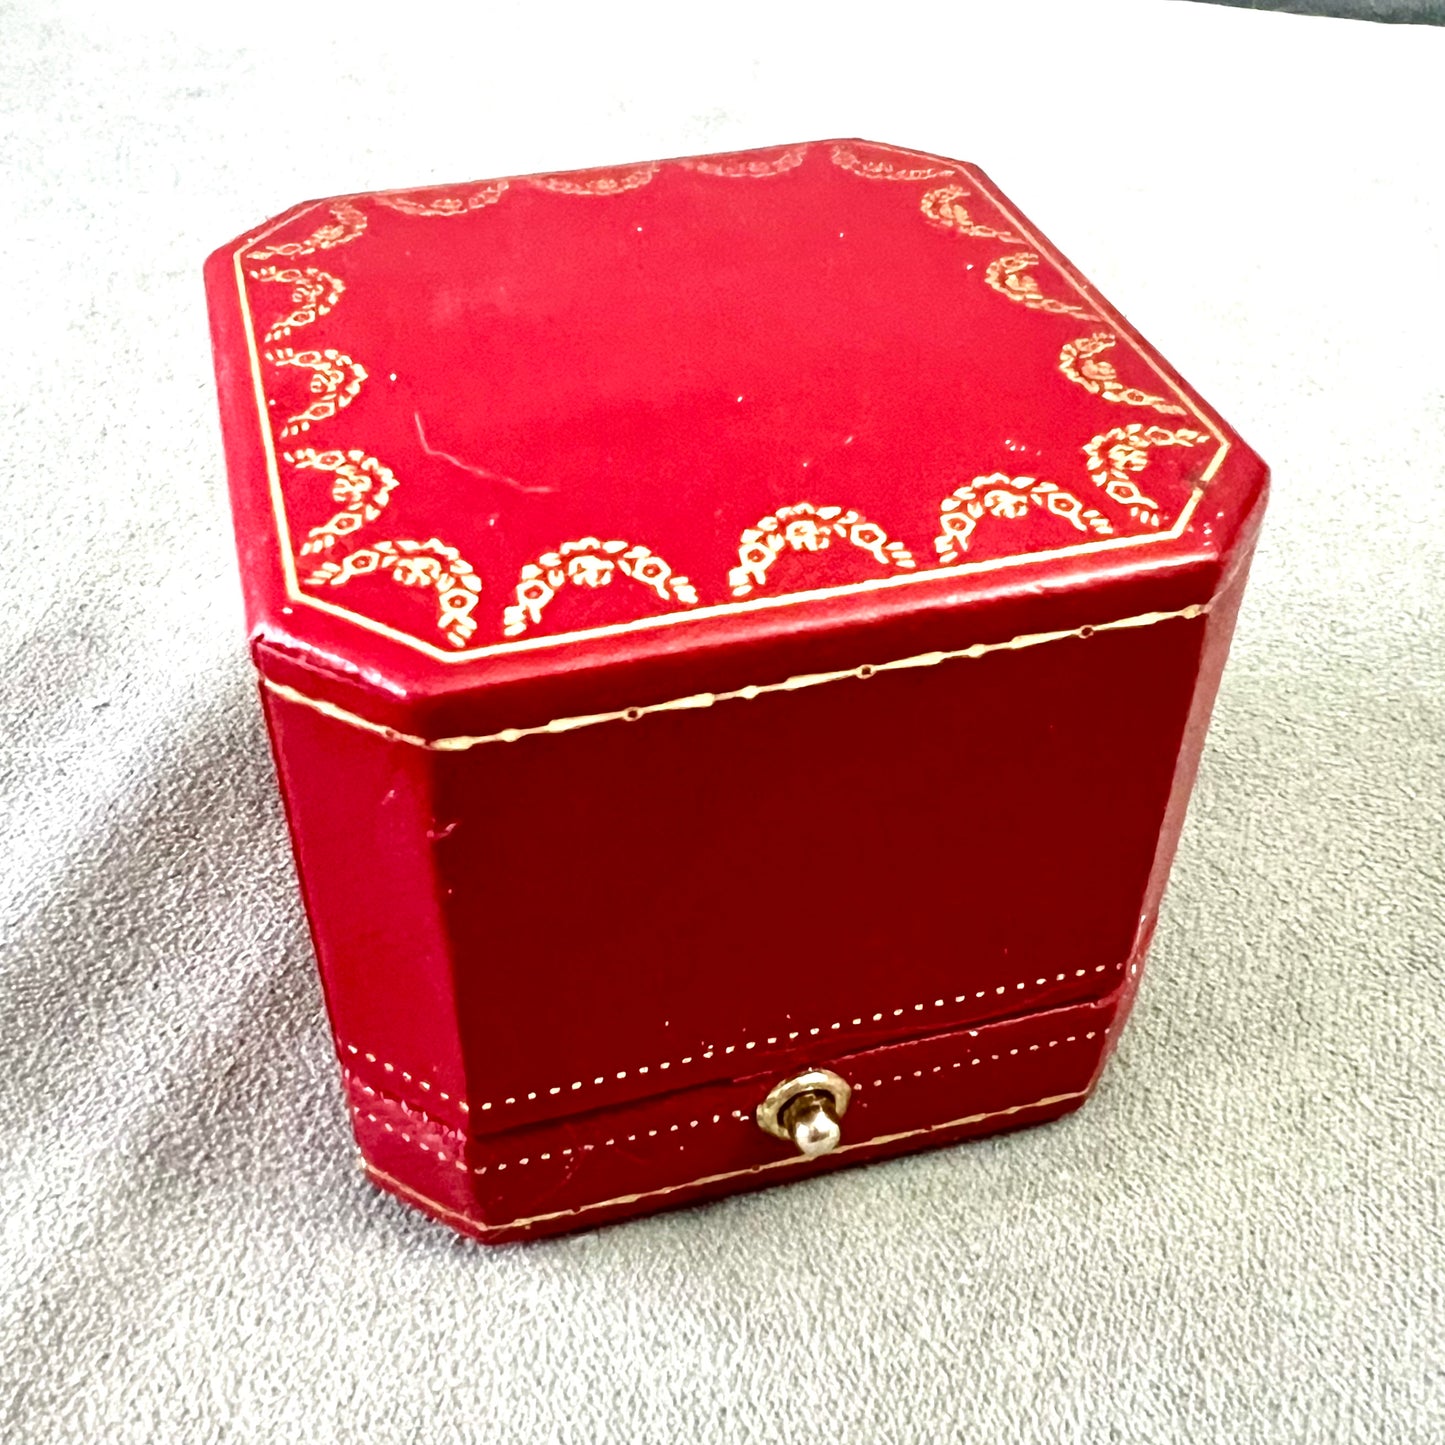 CARTIER Ring Box